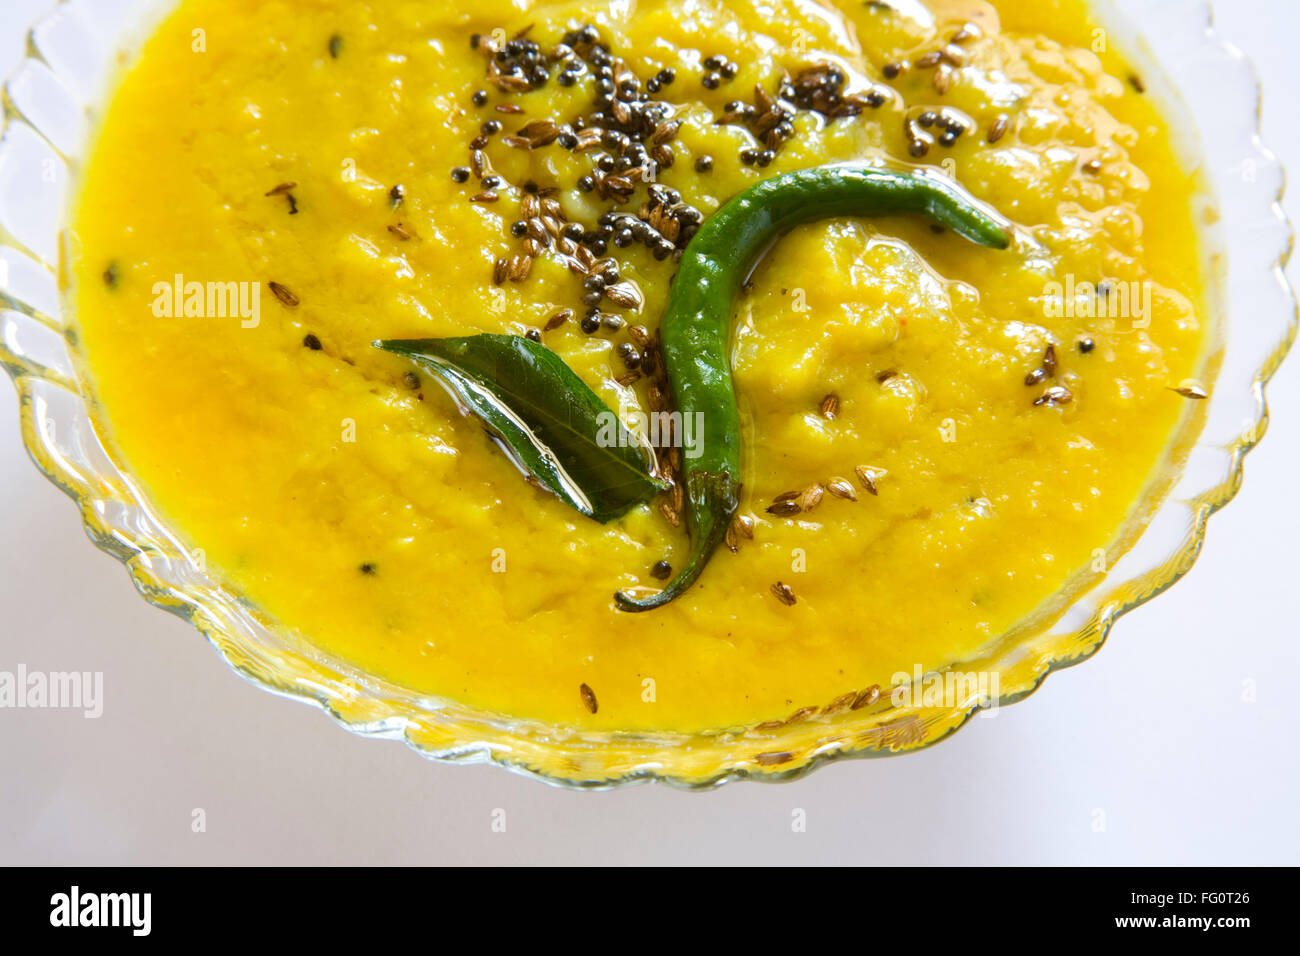 Indian cuisine fry or tadka moong dal mung beans phaseolus aureus served in bowls , India Stock Photo